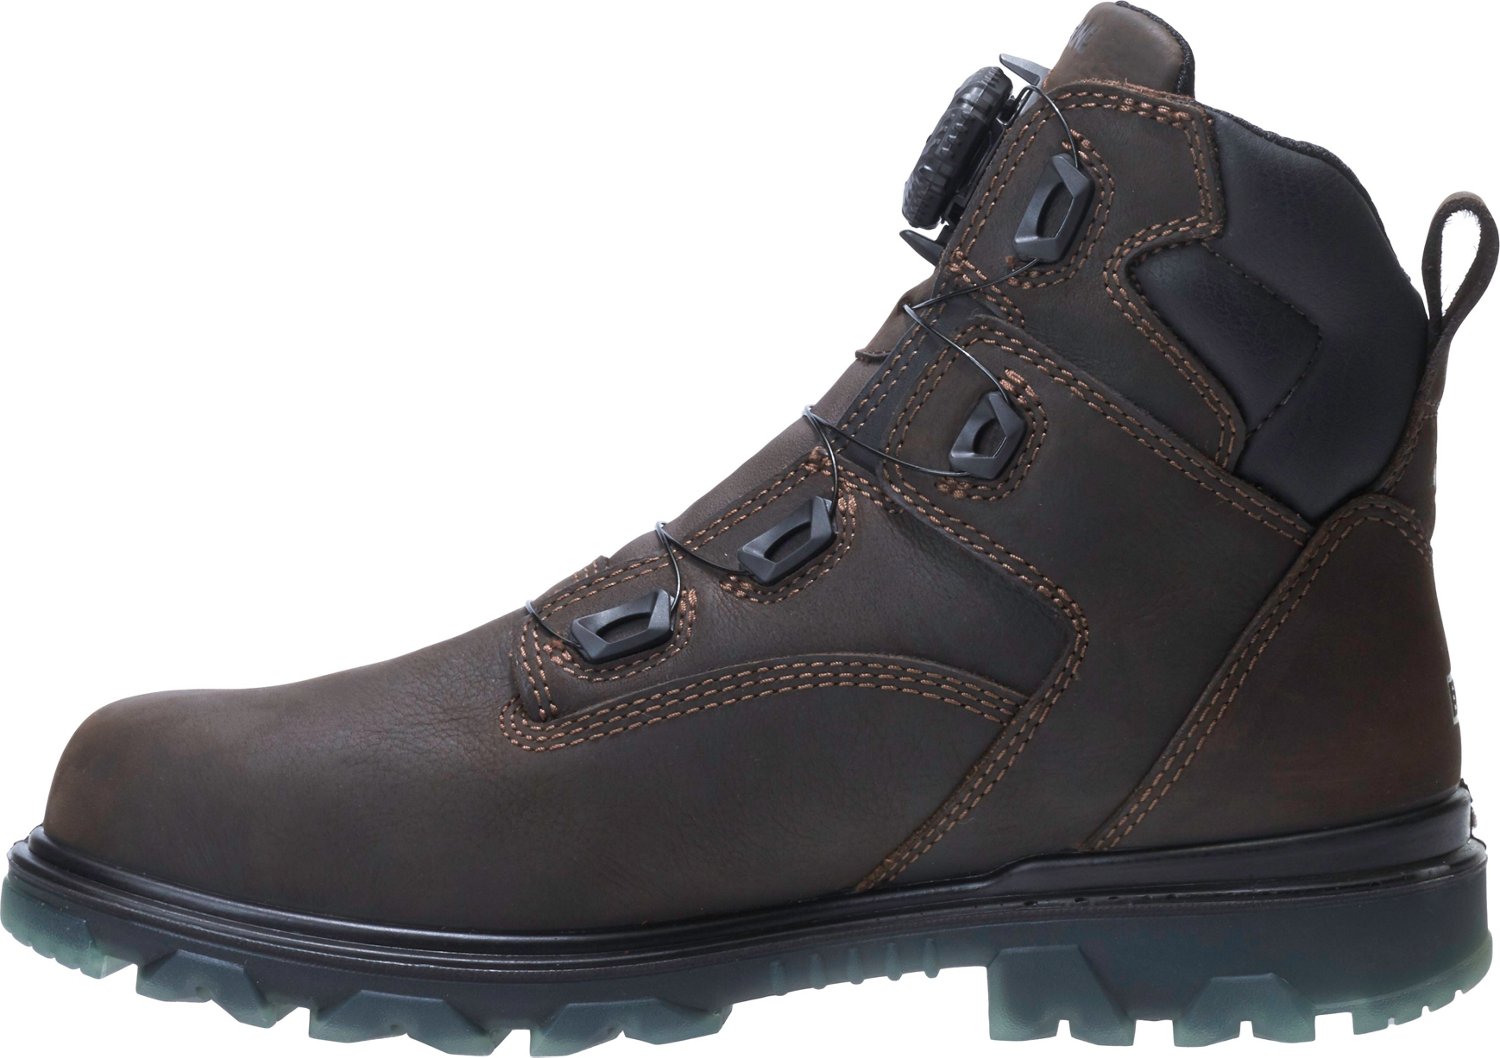 Wolverine Men's I-90 EPX BOA Composite Toe Work Boots | Academy